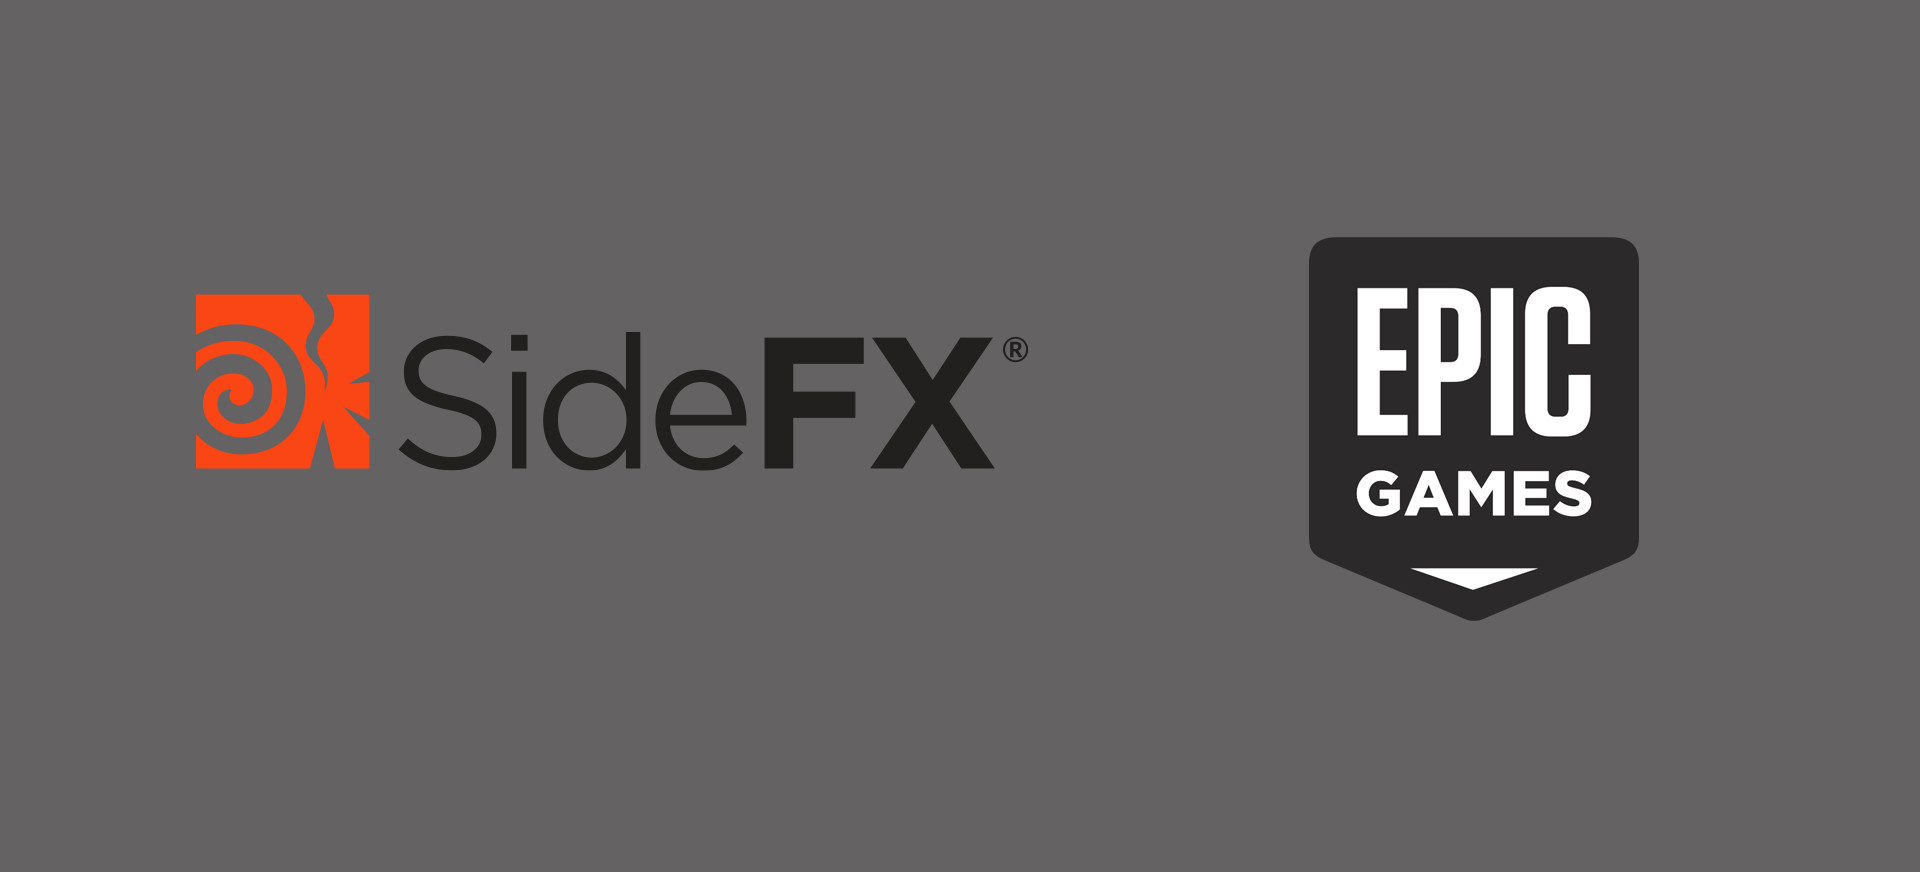 Epic Games Invests in SideFX